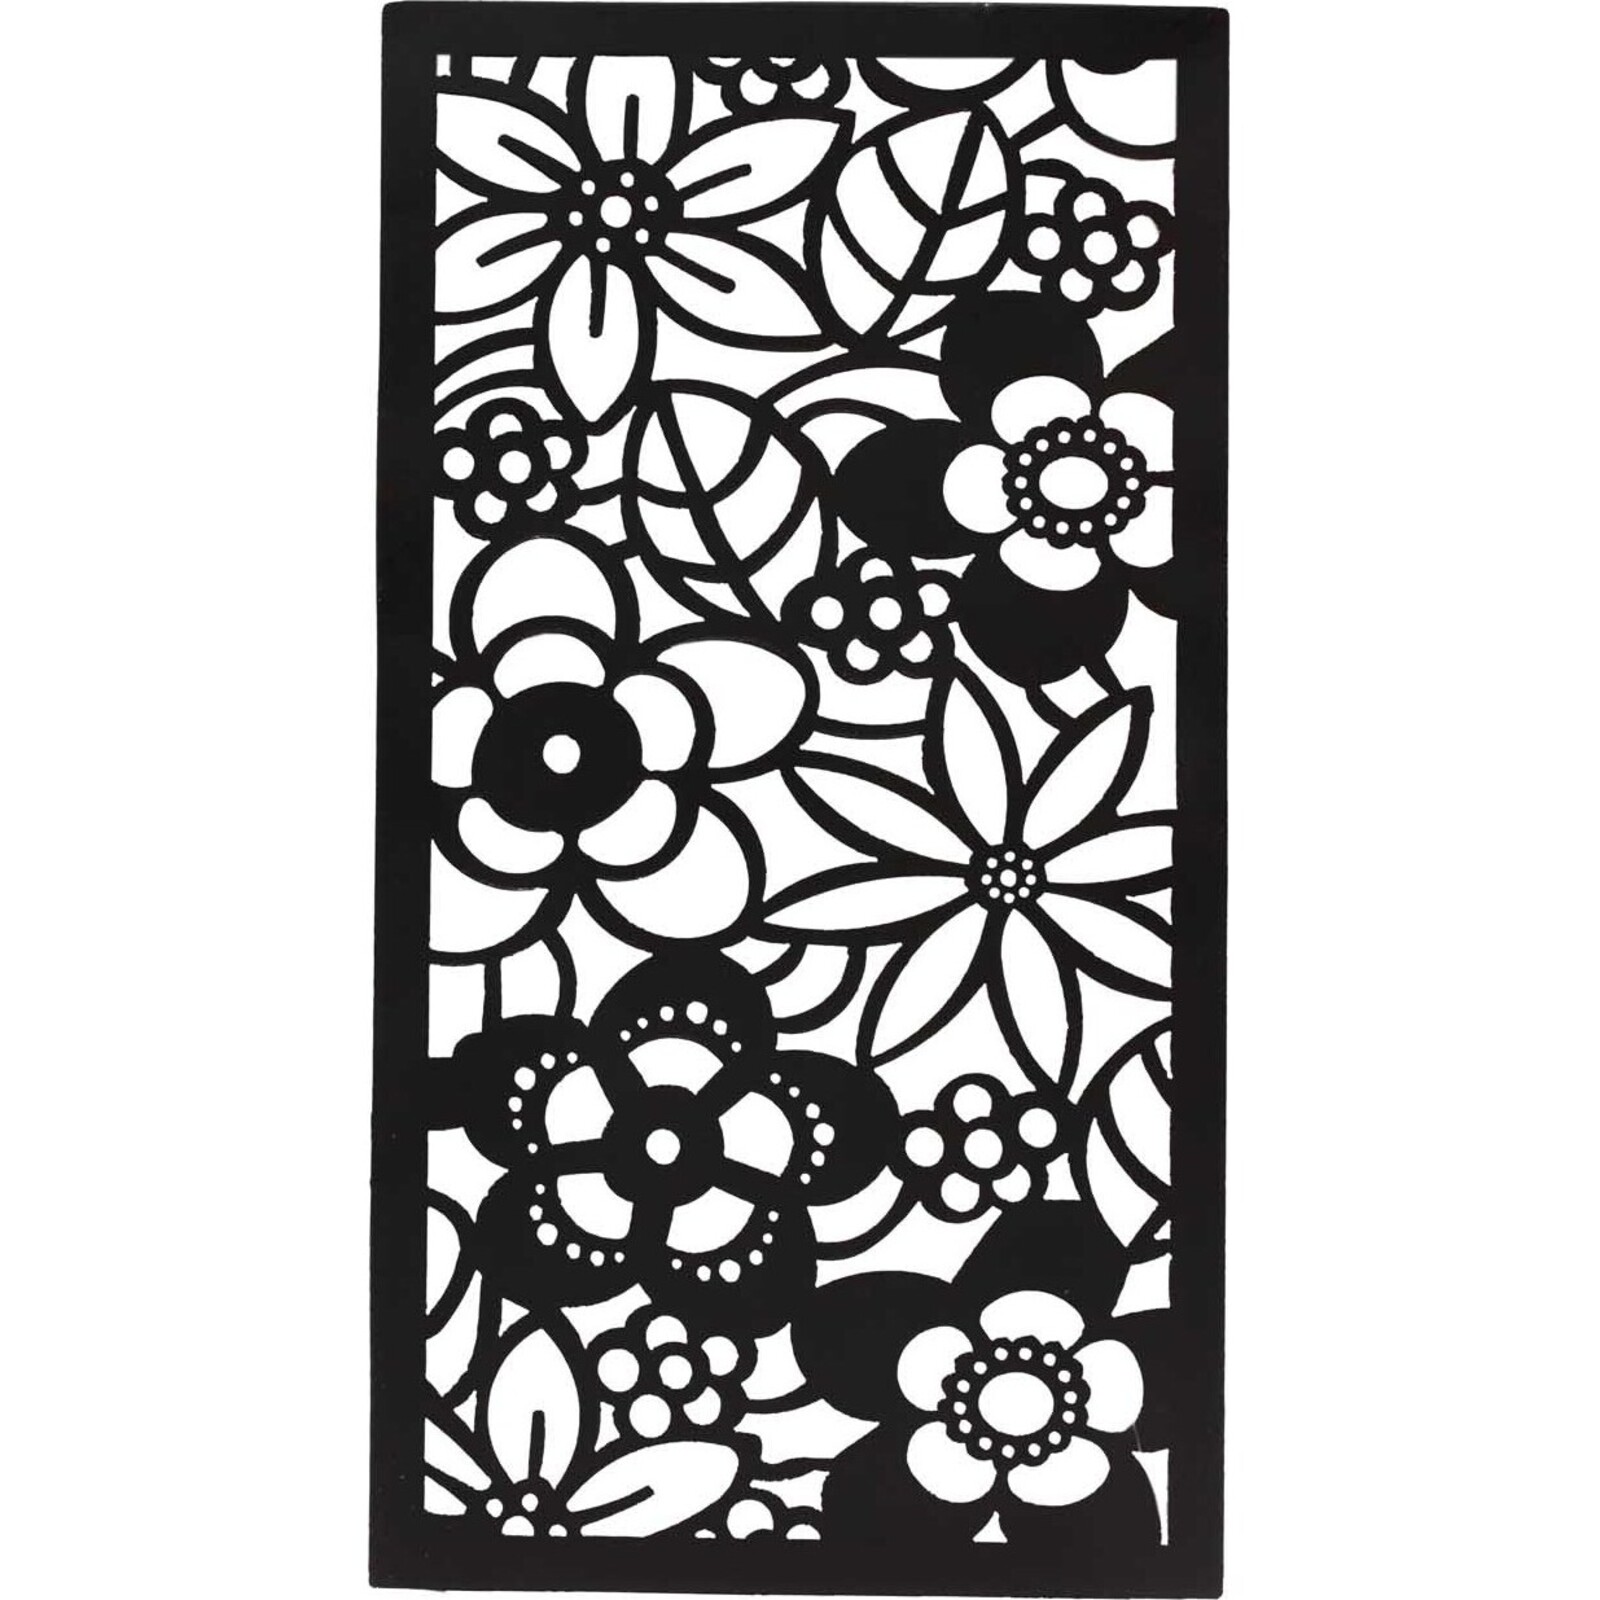 Wall Panel - Blooms